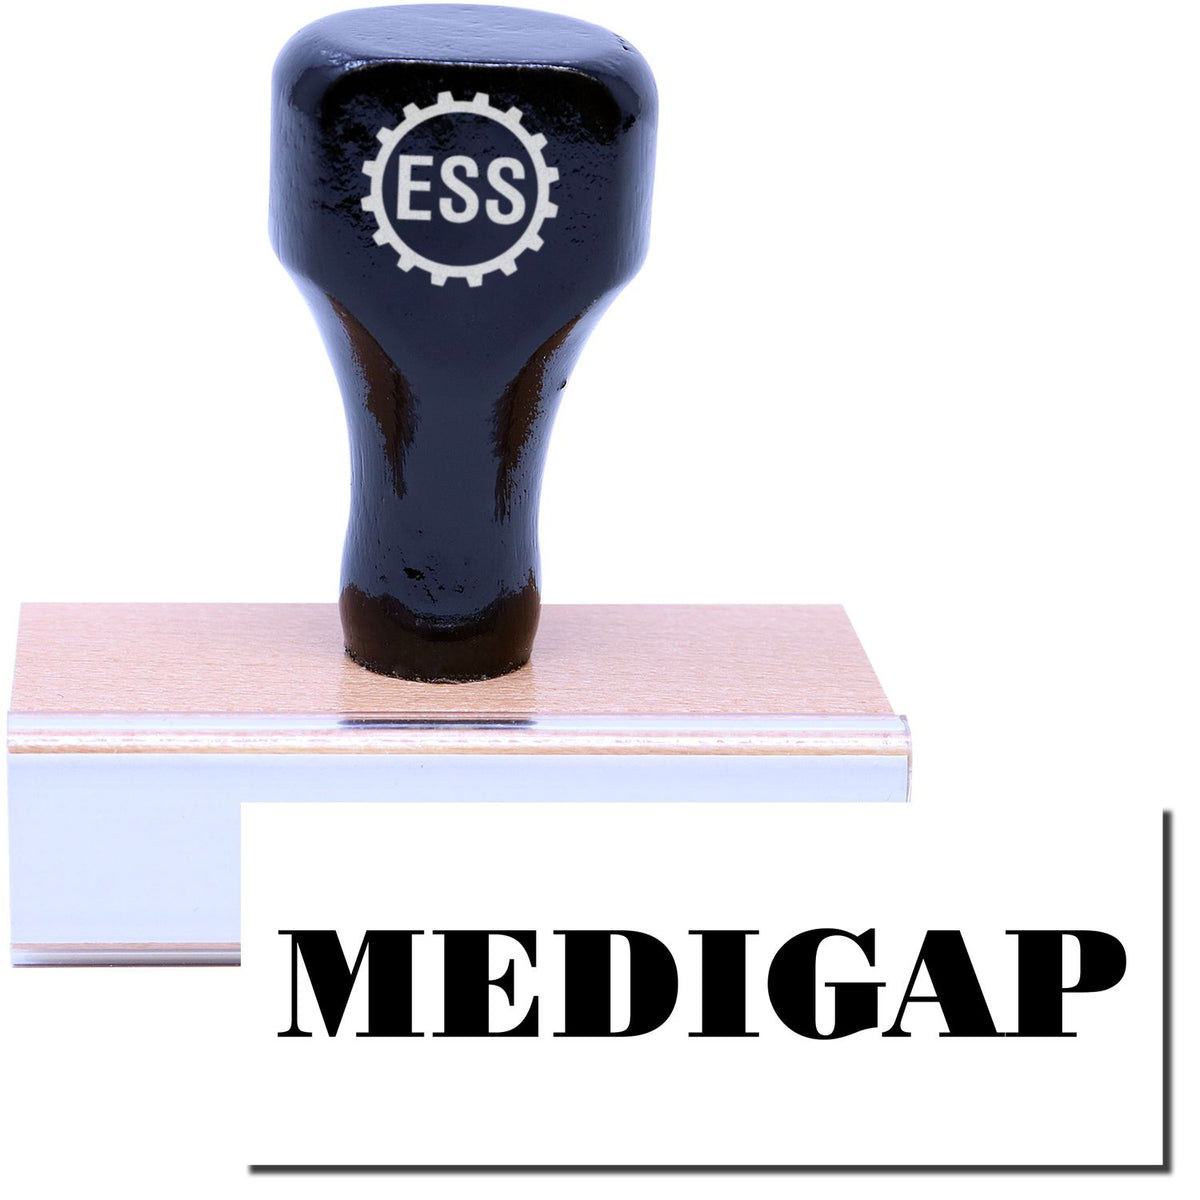 A stock office rubber stamp with a stamped image showing how the text &quot;MEDIGAP&quot; in a large font is displayed after stamping.